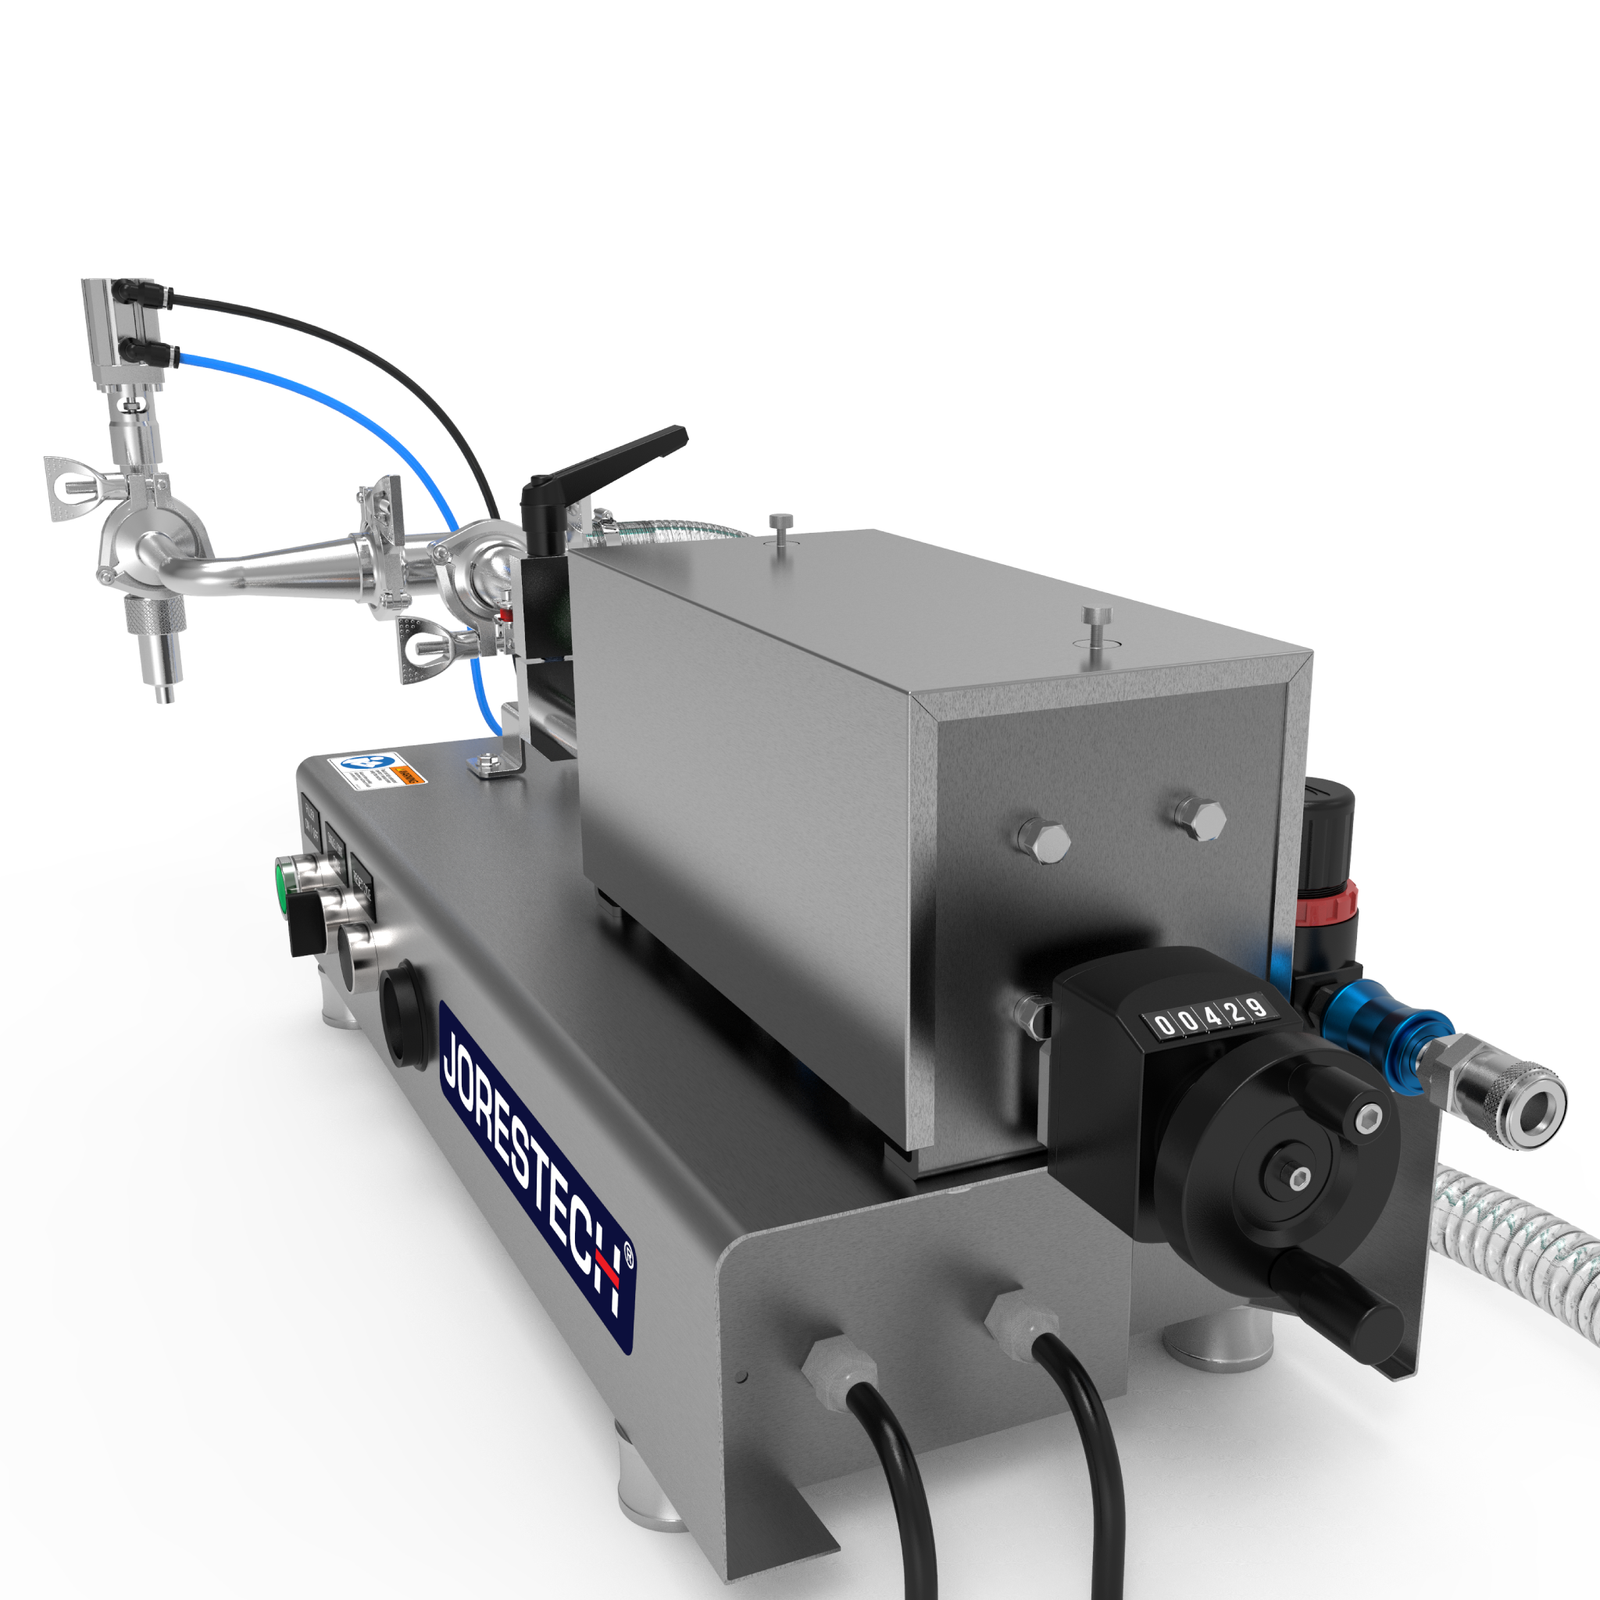 A Low viscosity Jorestech liquid filling machine shown from the back. The fill volume adjuster, main input hose, and compressed air connector can be easily appreciated.